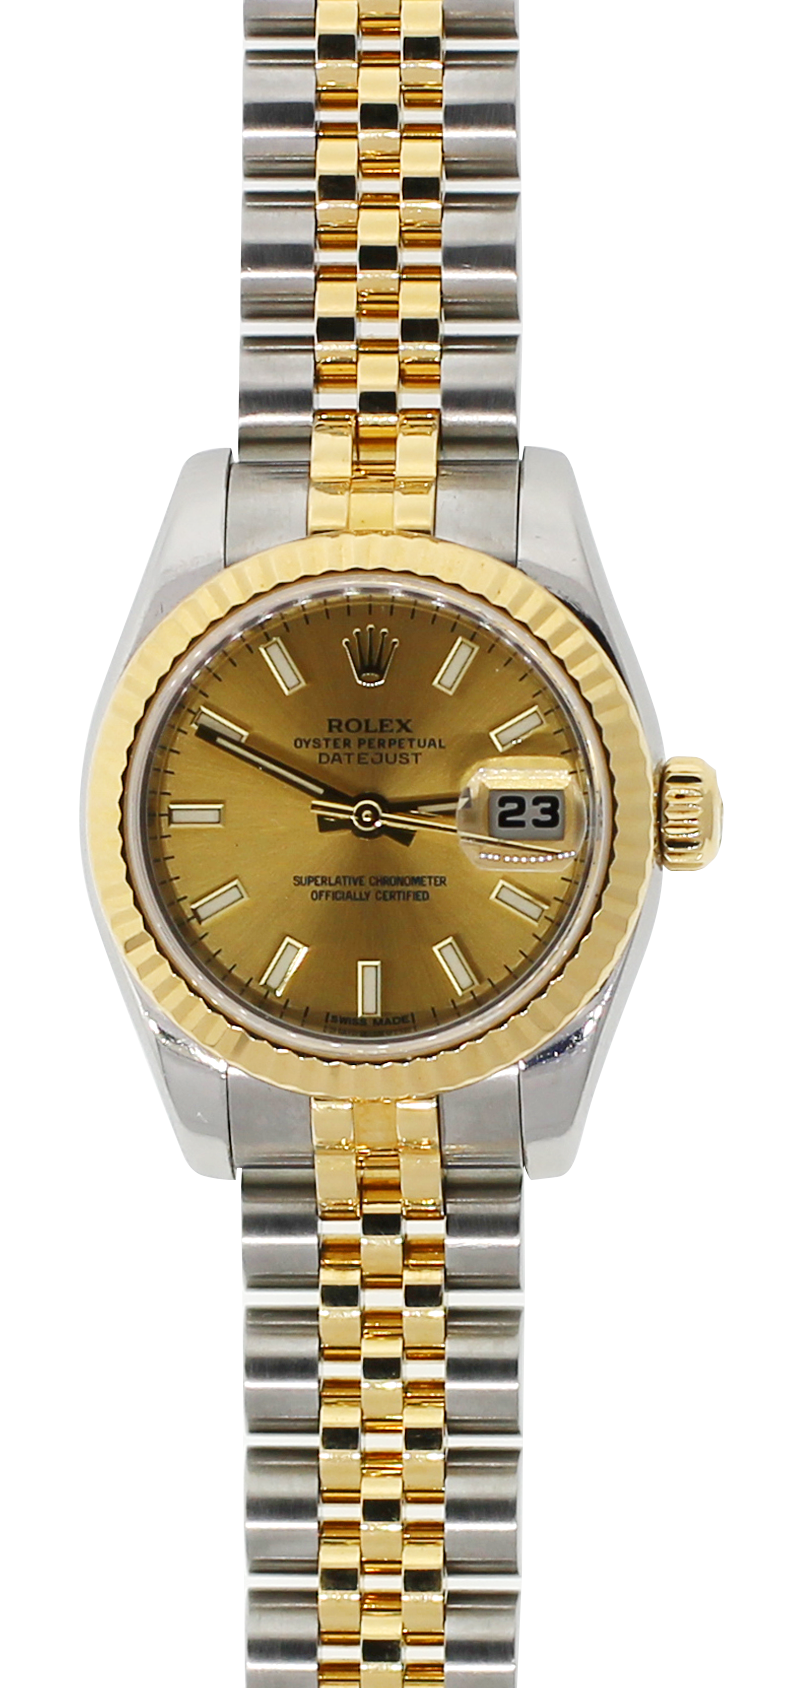 Rolex Two-Tone Datejust Champagne Dial Model 179173 with Box & Card